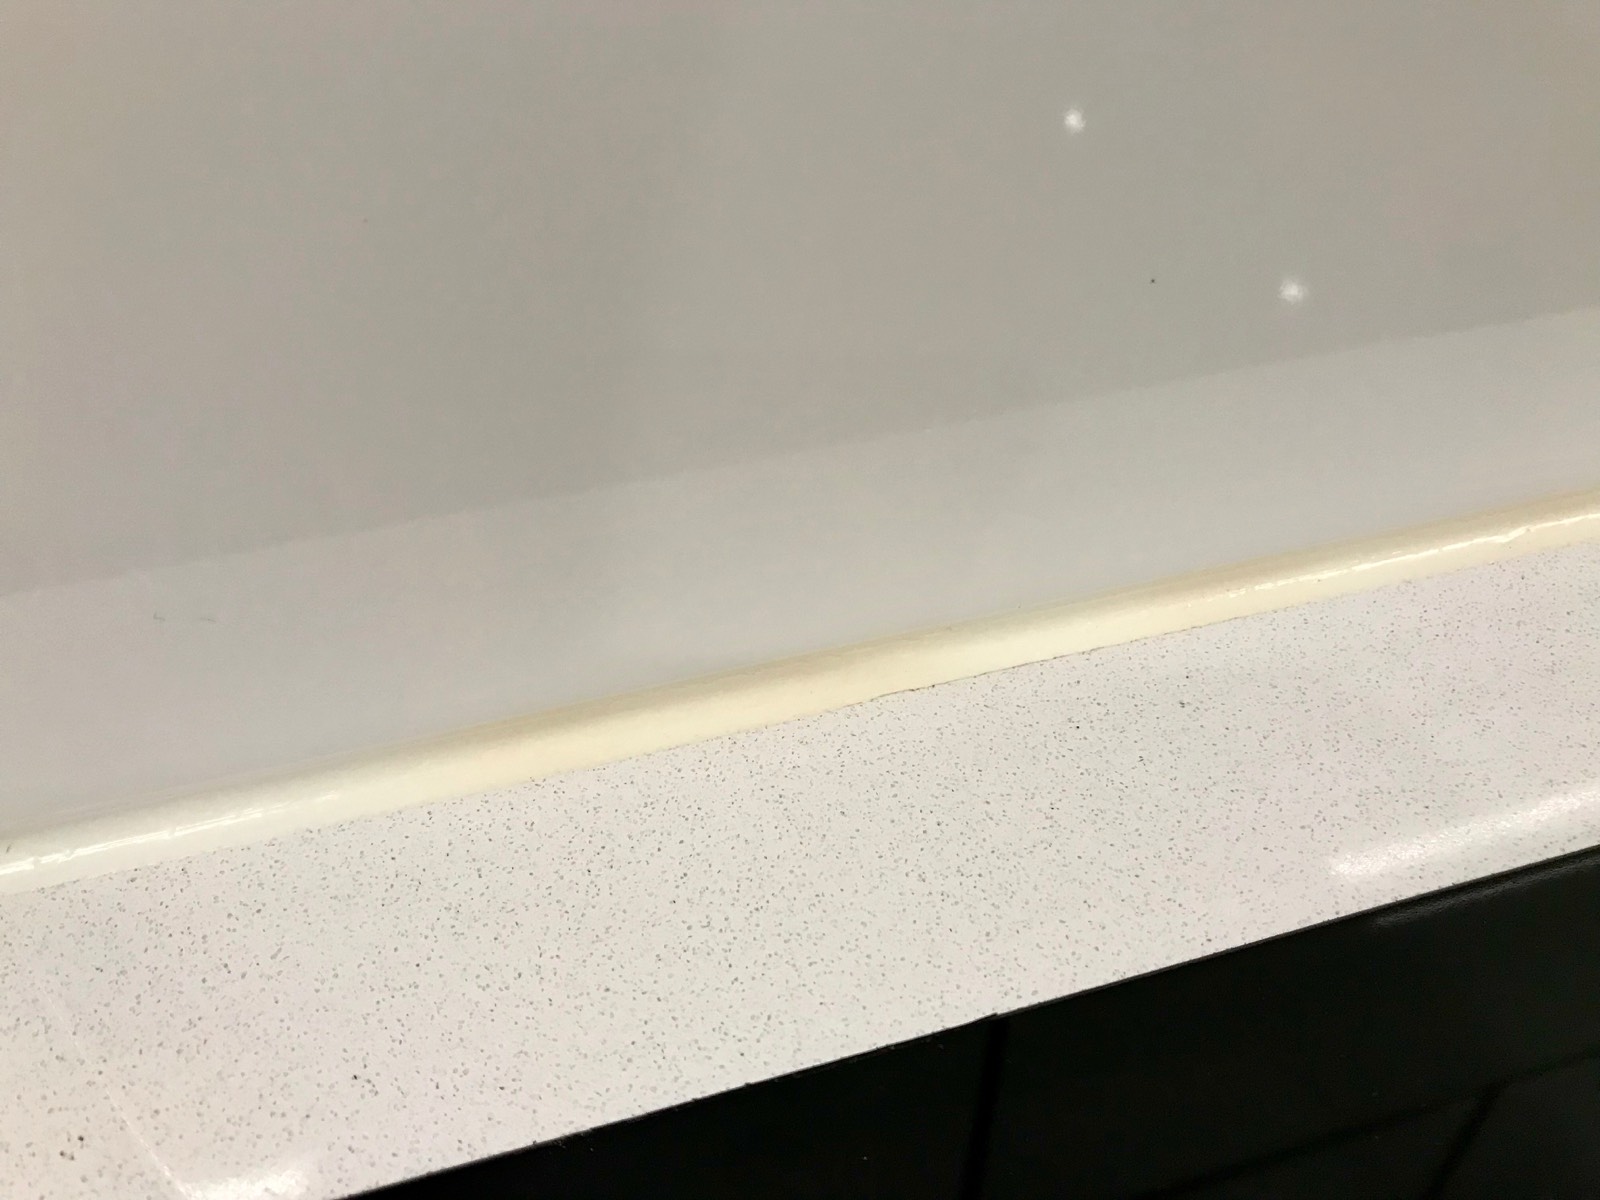 Kitchen Silicone discoloured after a few weeks